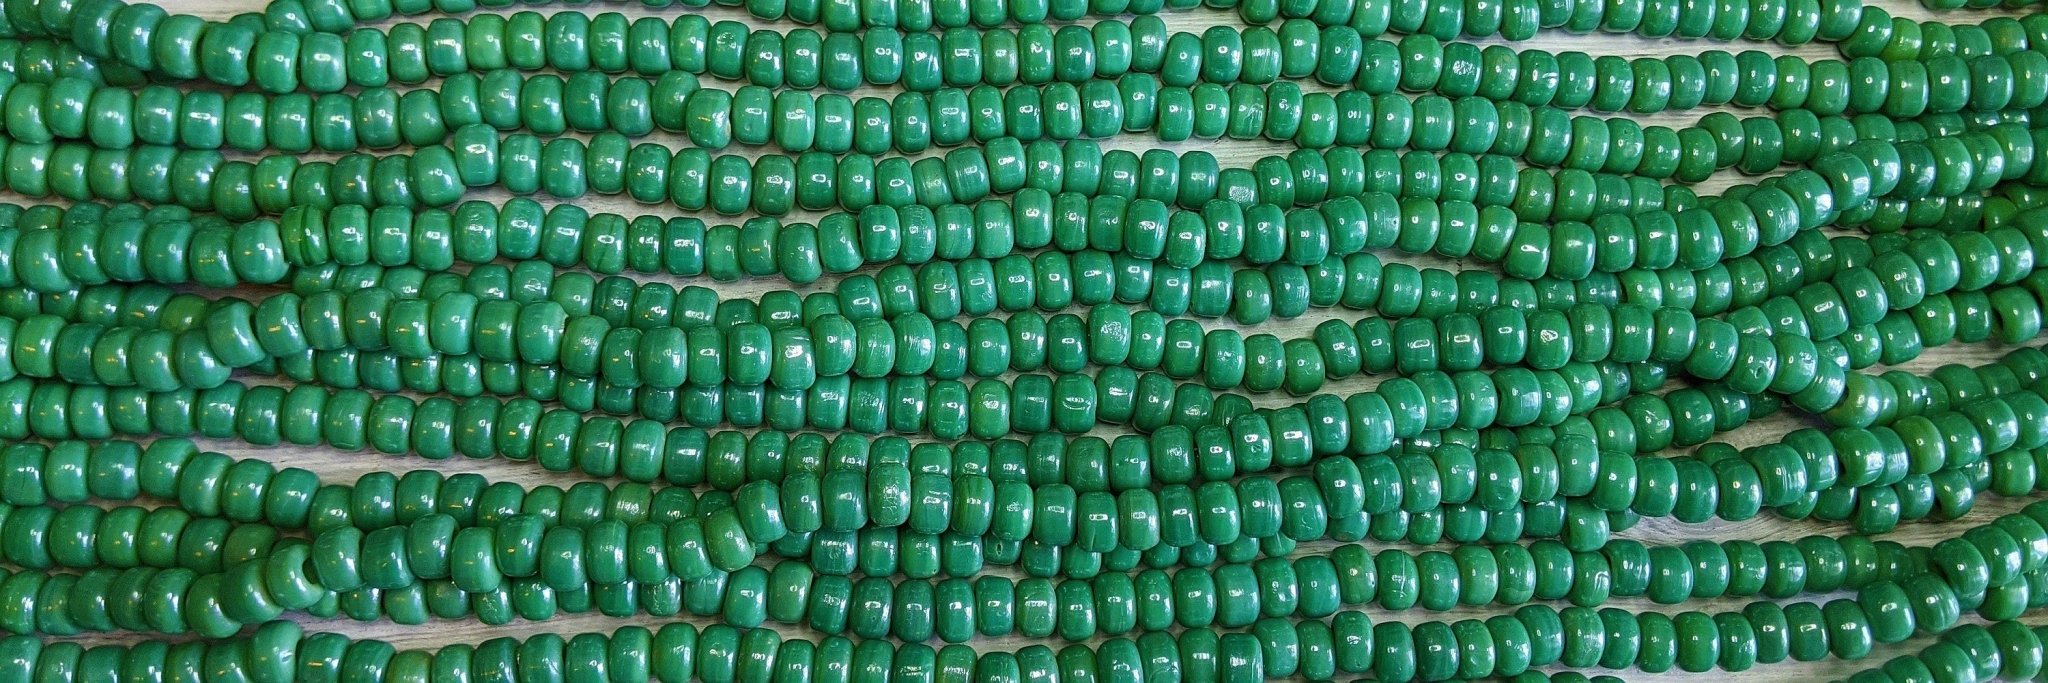 Opaque Green Luster - Size 9x6mm (3mm hole) Recycled Glass Crow Beads - 24 Inch Strand (ICB18) - Beads and Babble